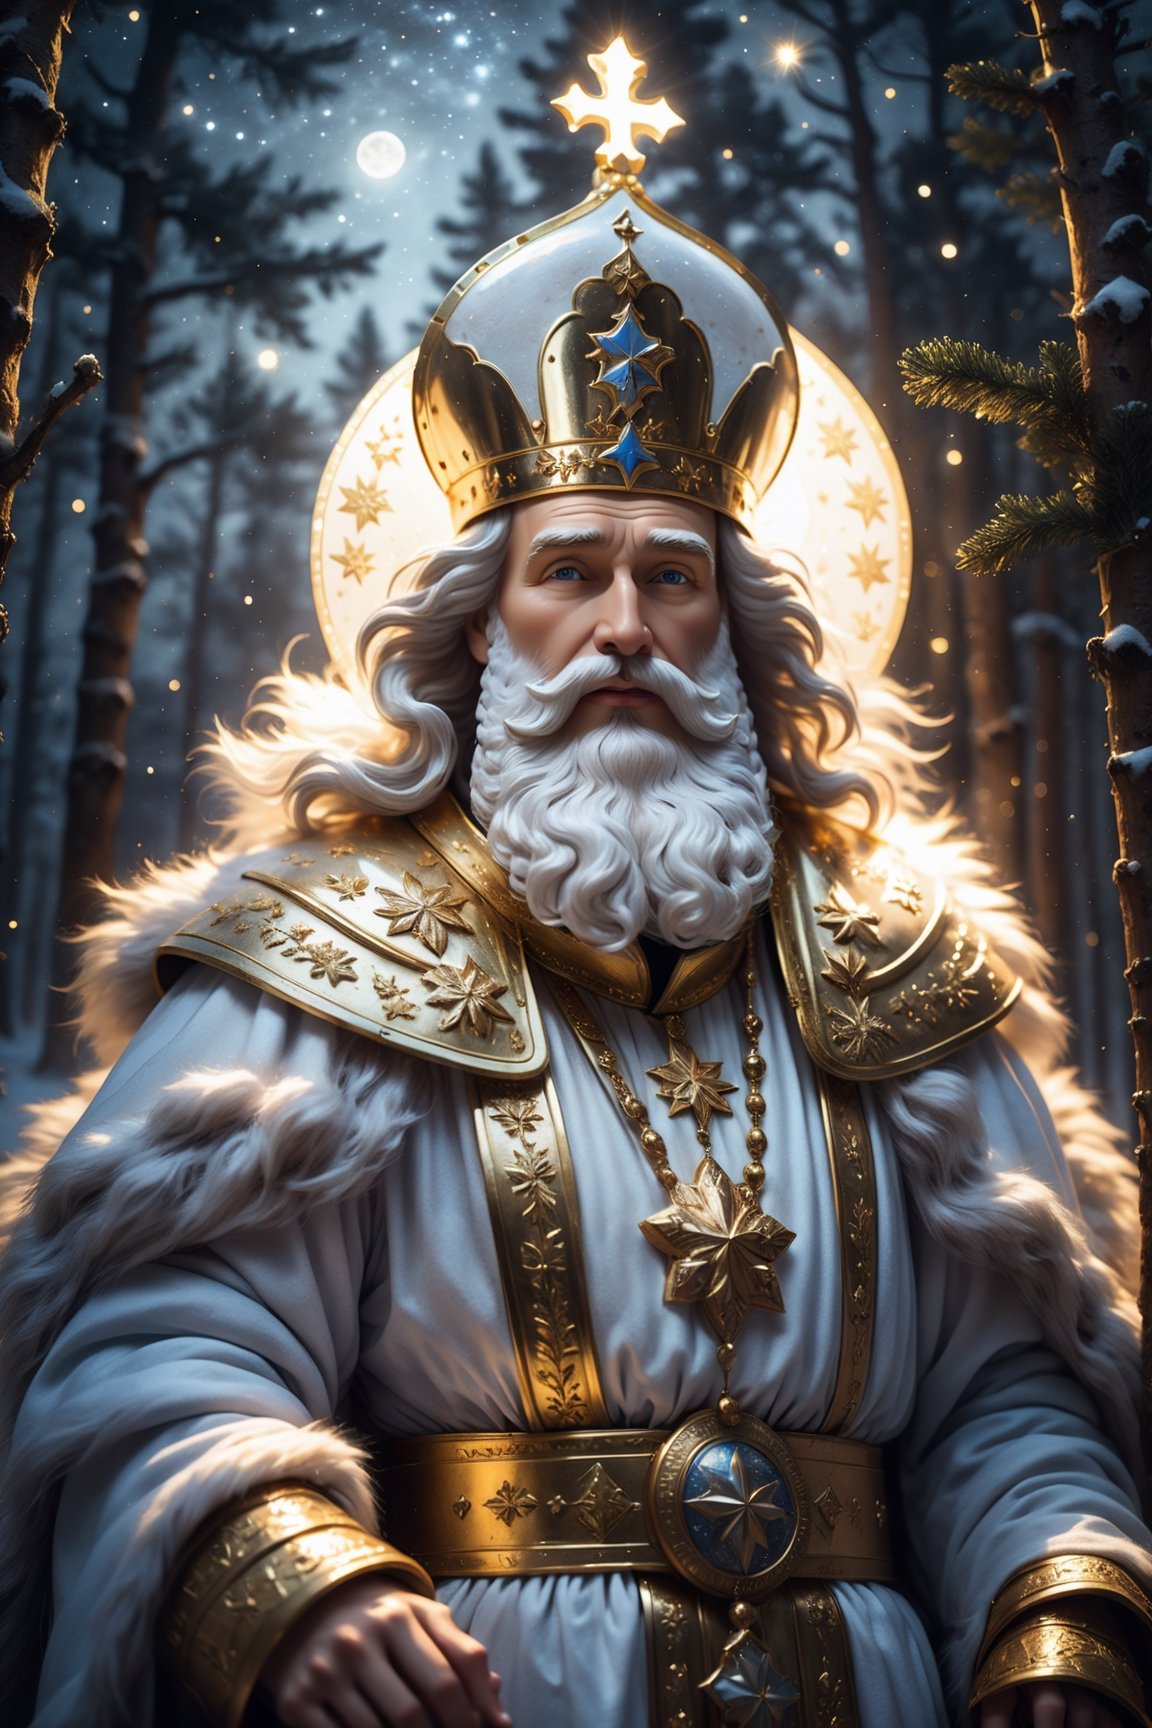 in the forest stands (((an ancient Russian icon of St. Nicholas the Wonderworker))), behind it is a huge ghostly silhouette of (((an ancient Slavic god))), winter, night, many stars, space, planets, milky way, rotation of the Galaxy, mysticism
extremely high quality RAW photograph, detailed background, intricate, Exquisite details and textures, highly detailed, ultra detailed photograph, warm lighting, artstation, 4k, sharp focus, high resolution, detailed skin, detailed eyes, 8k uhd, dslr,  high quality, film grain, Fujifilm XT3
Eerie
Surrealistic
Breathtaking
Majestic
moody golden fur design
dramatic light